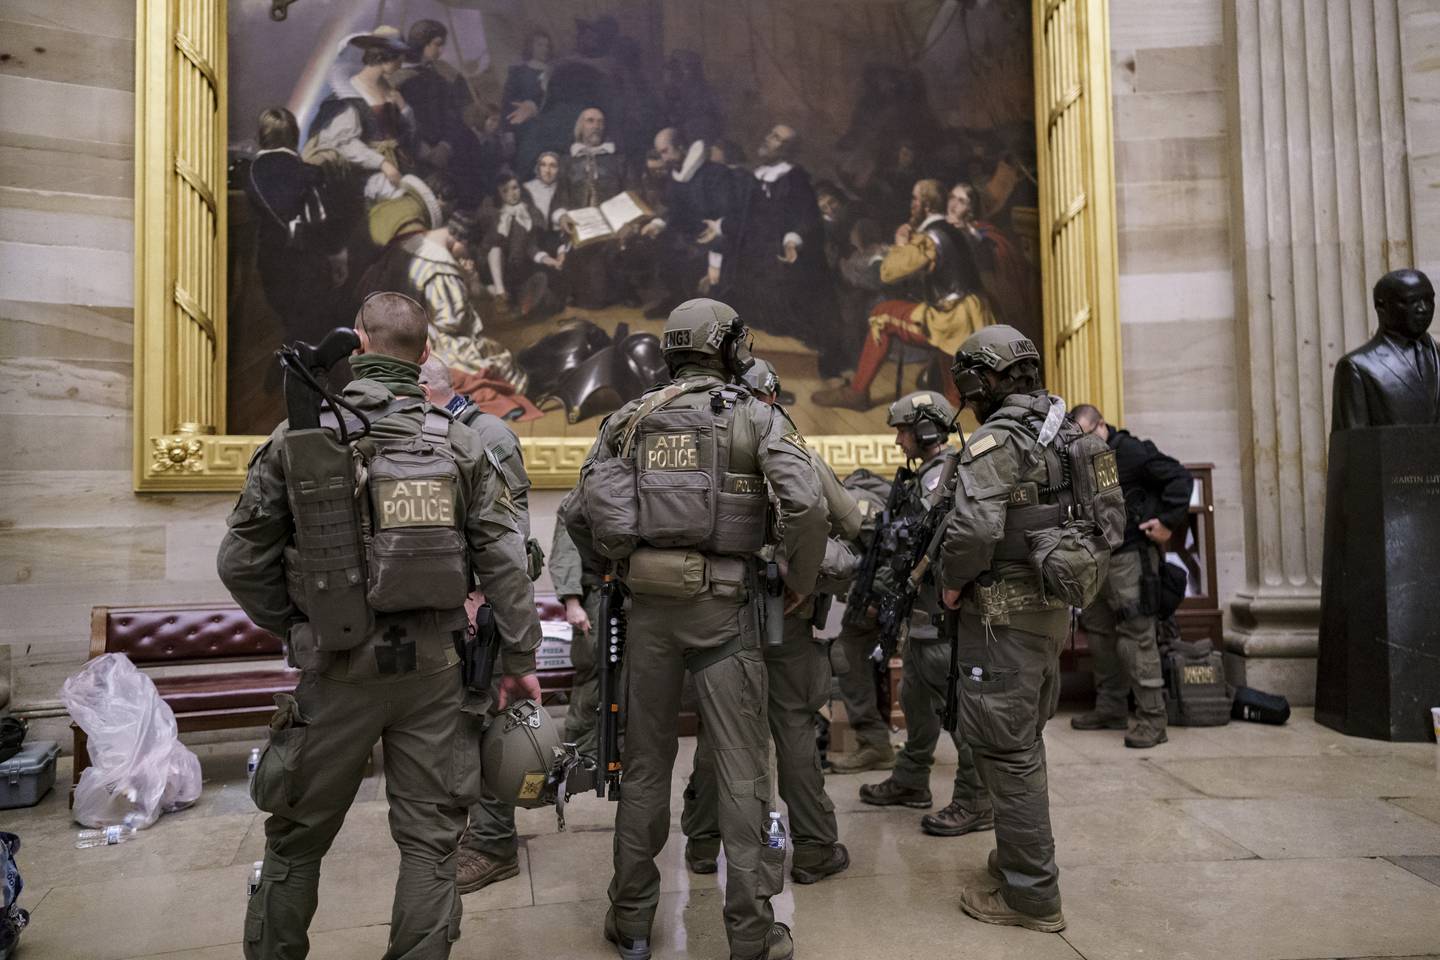 After violent protesters loyal to President Donald Trump stormed the U.S. Capitol today, a tactical team with ATF gathers in the Rotunda to provide security for the continuation of the joint session of the House and Senate to count the Electoral College votes cast in November's election, at the Capitol in Washington, Wednesday, Jan. 6, 2021. (AP Photo/J. Scott Applewhite)